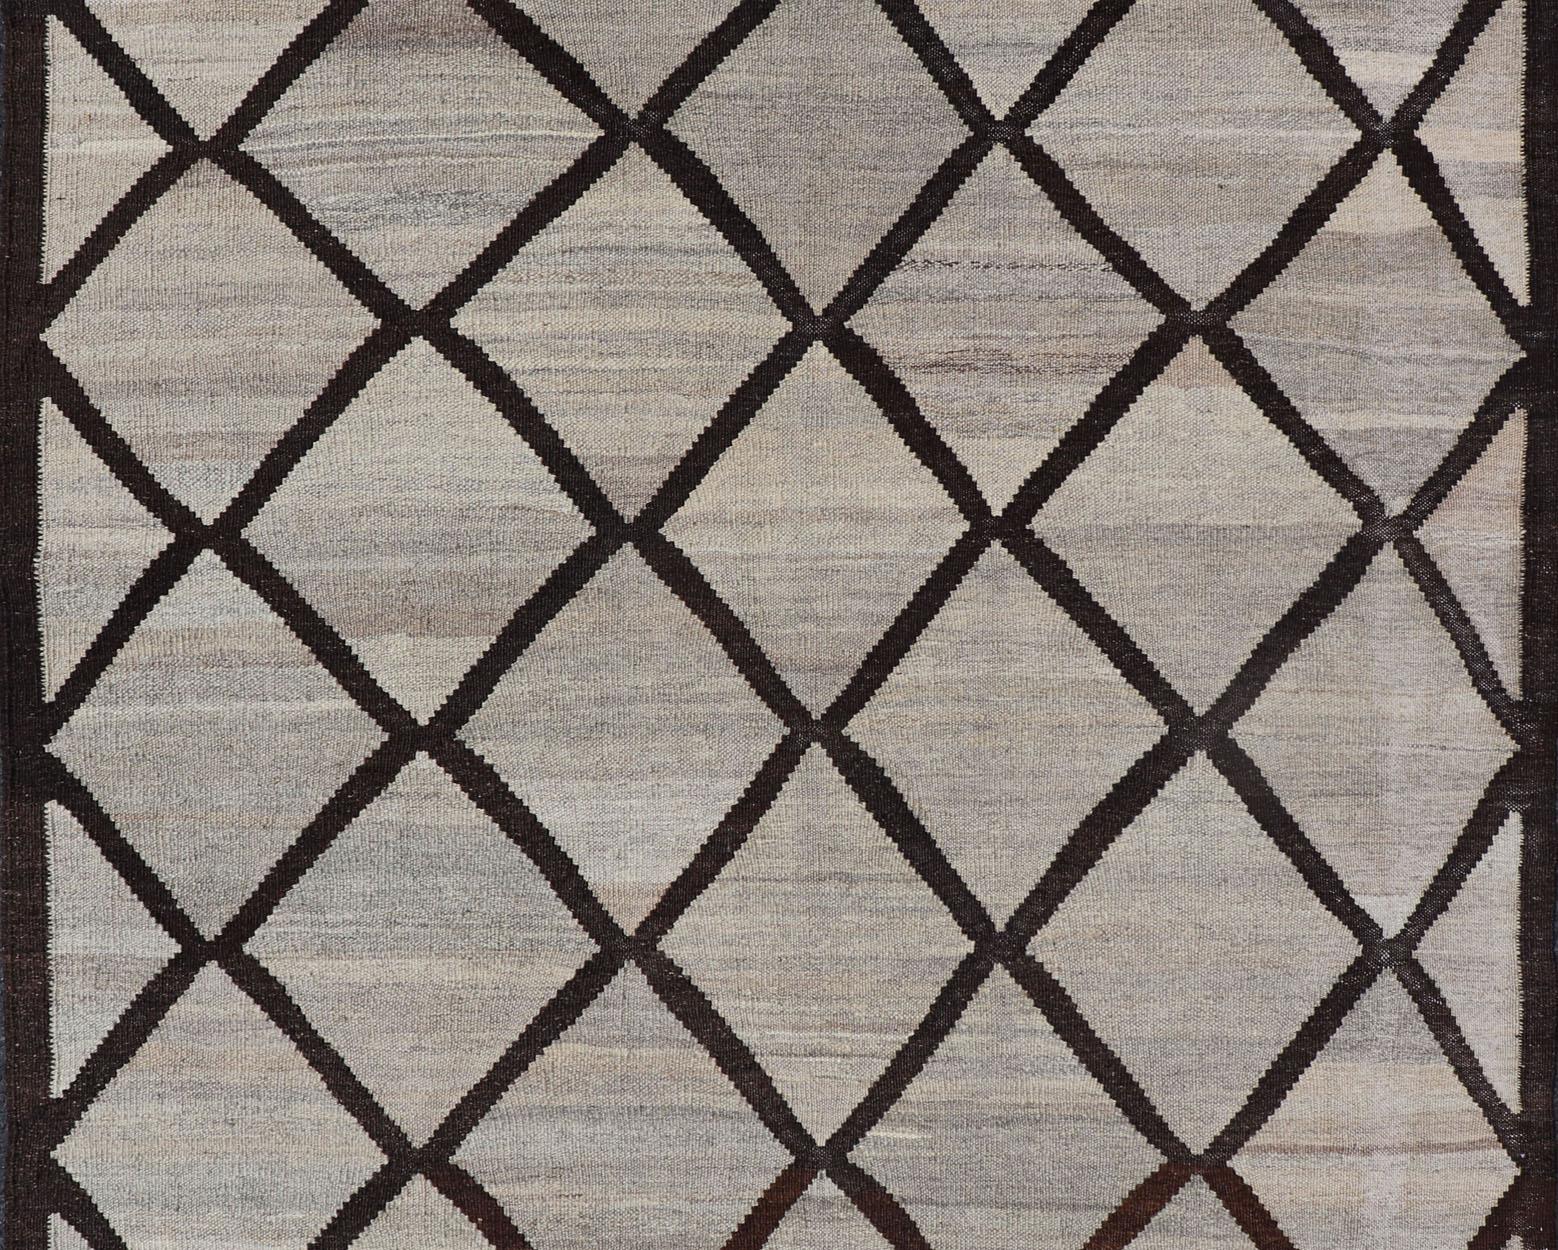 Afghan Natural Color-Tone Flat-Weave Kilim in Diamond Design For Sale